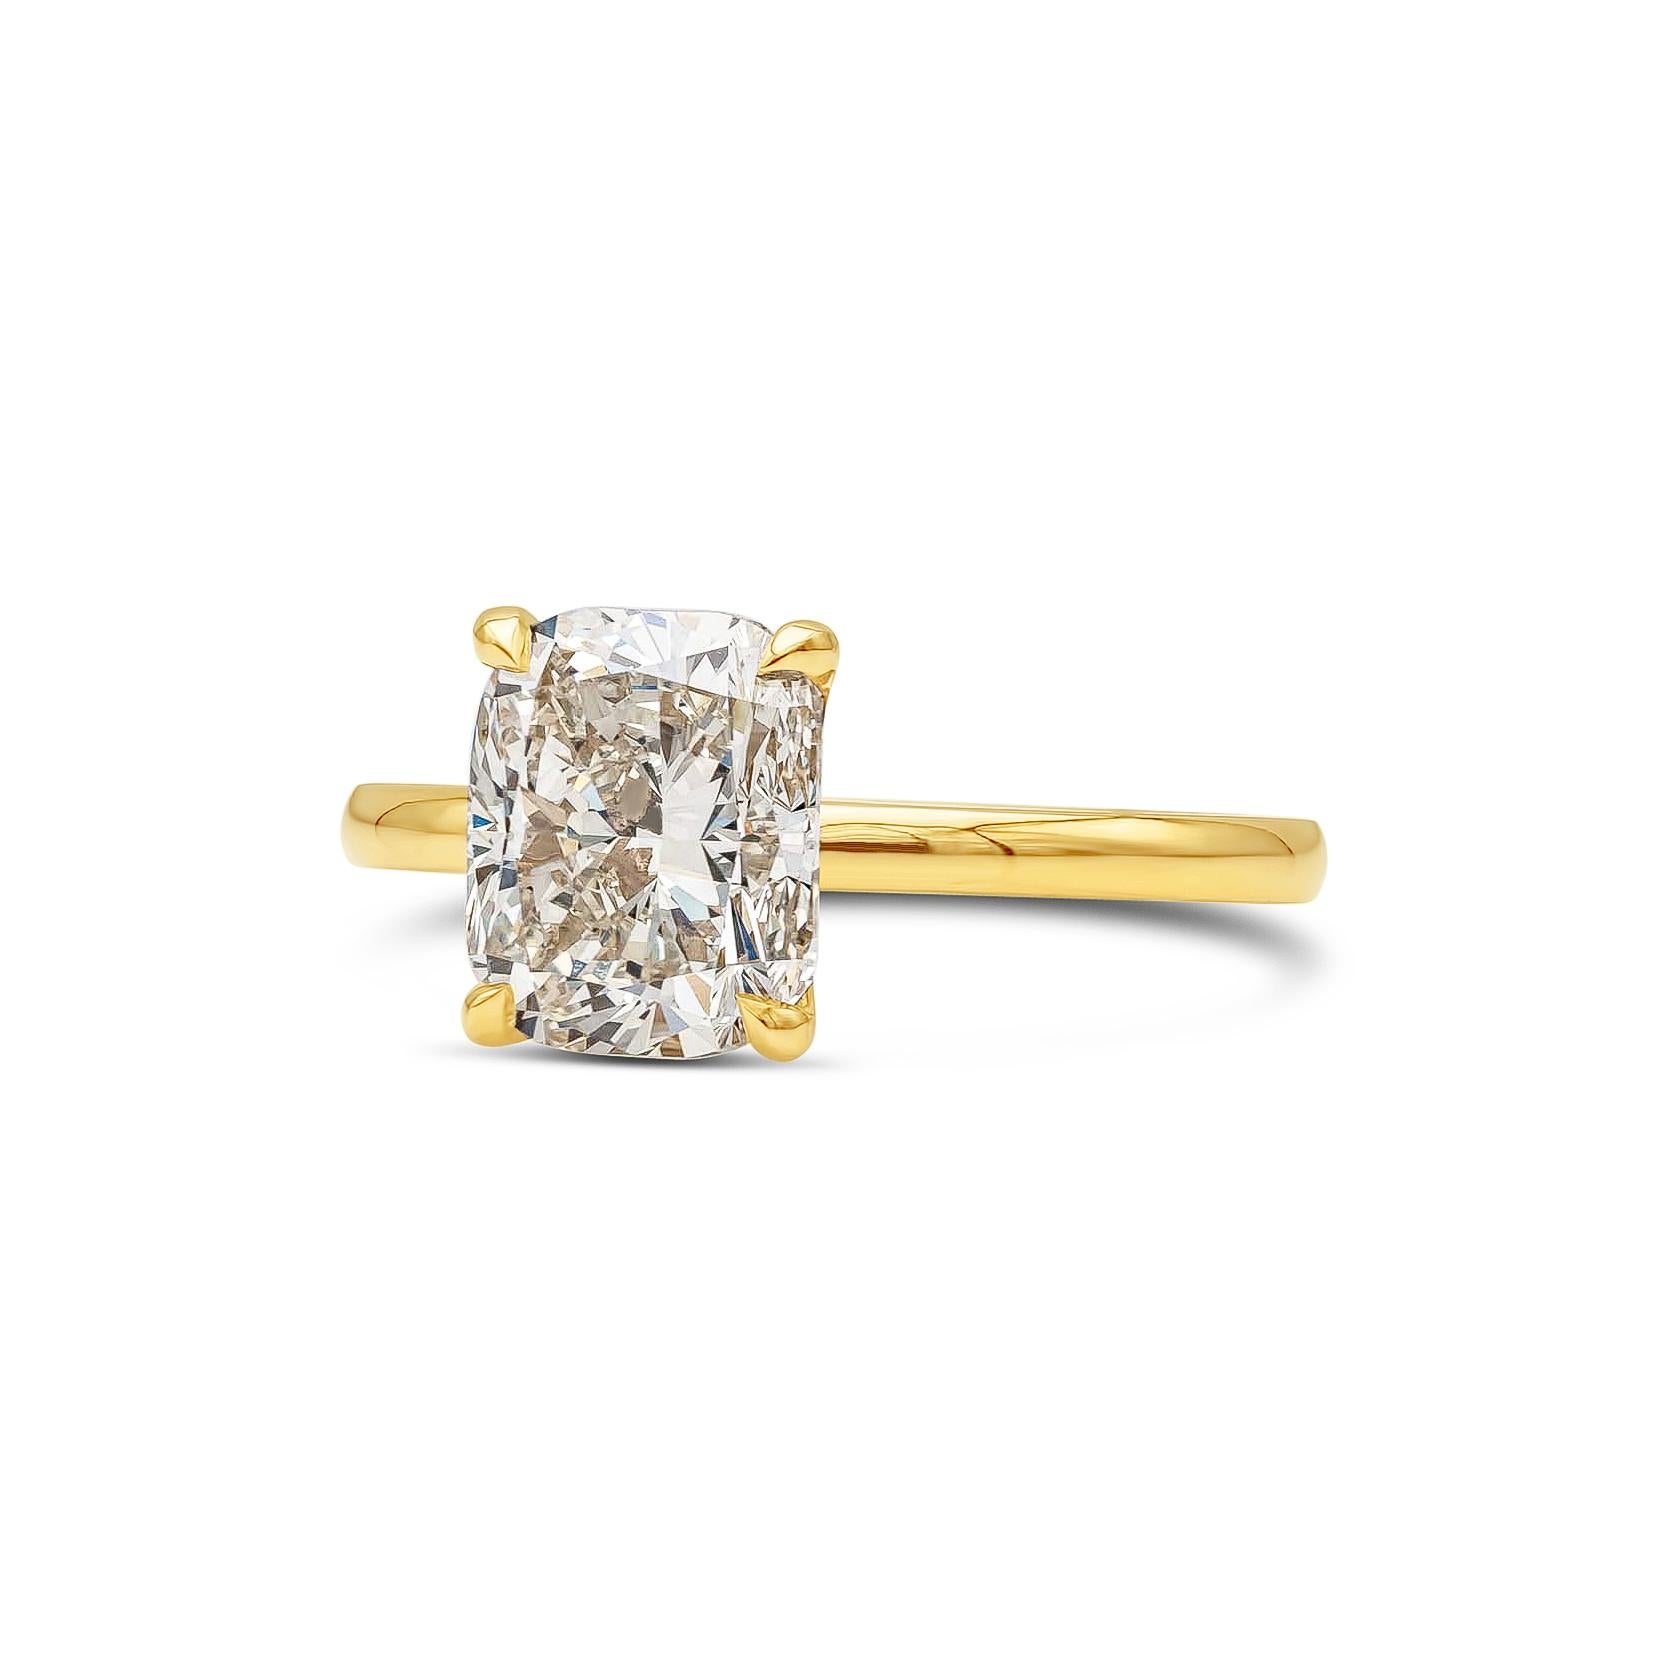 A simple and classic solitaire engagement ring style showcasing a GIA Certified 3.04 carat cushion cut diamond, N Color and VVS2 in Clarity. 4 prong set in a thin band. Made with 18K Yellow Gold. Size 6 US

Style available in different price ranges.